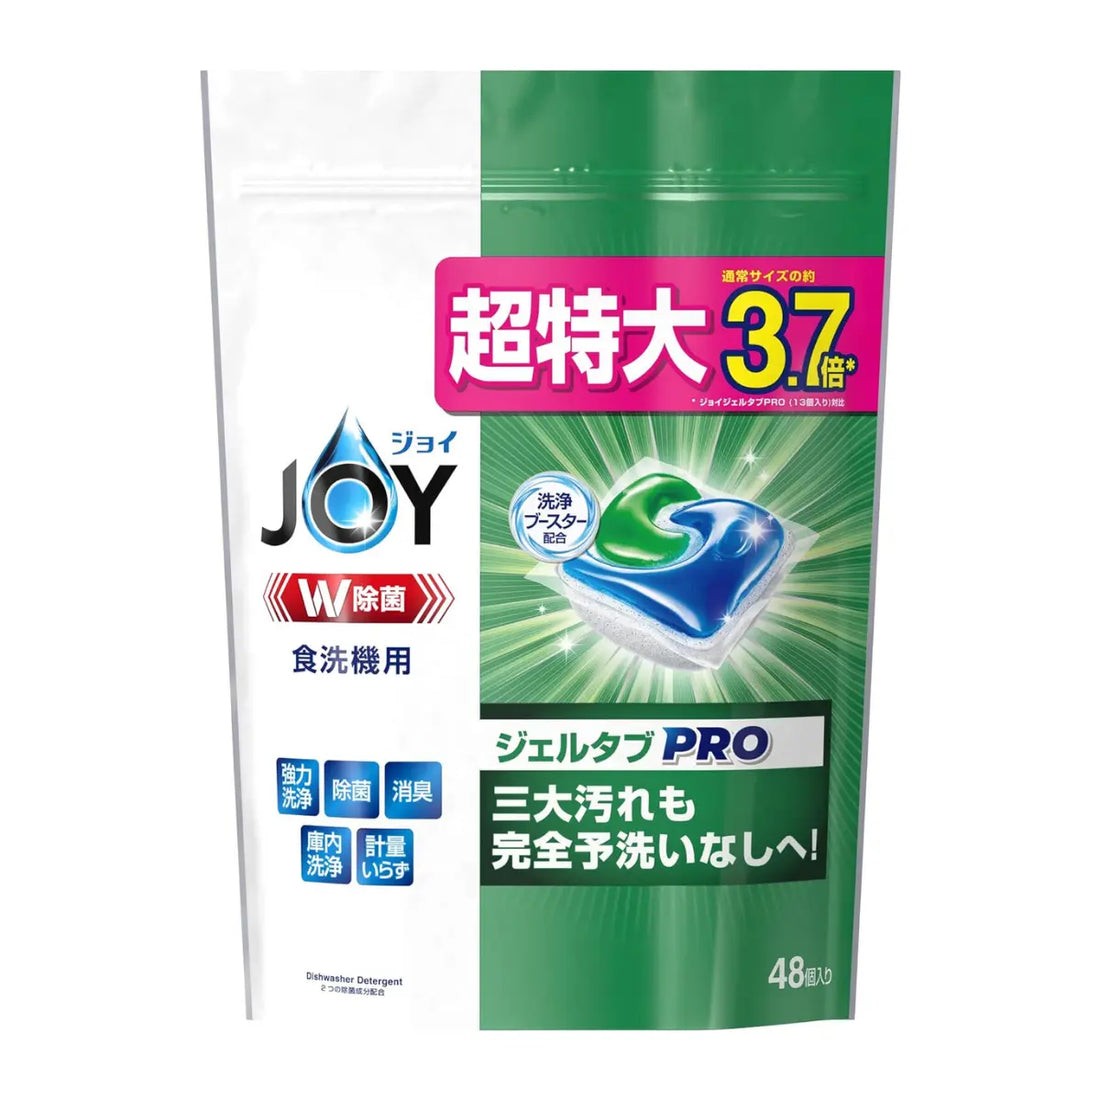 Dual formula dishwasher tablets with powder and gel for tough food stains. Cleansing booster breaks down oily grease and sticky stains effortlessly. Ensures thorough disinfection and deodorisation. Easy, hassle-free usage for a clean and fresh dishwasher! LION Joy Dishwasher Gel Tablets Pro